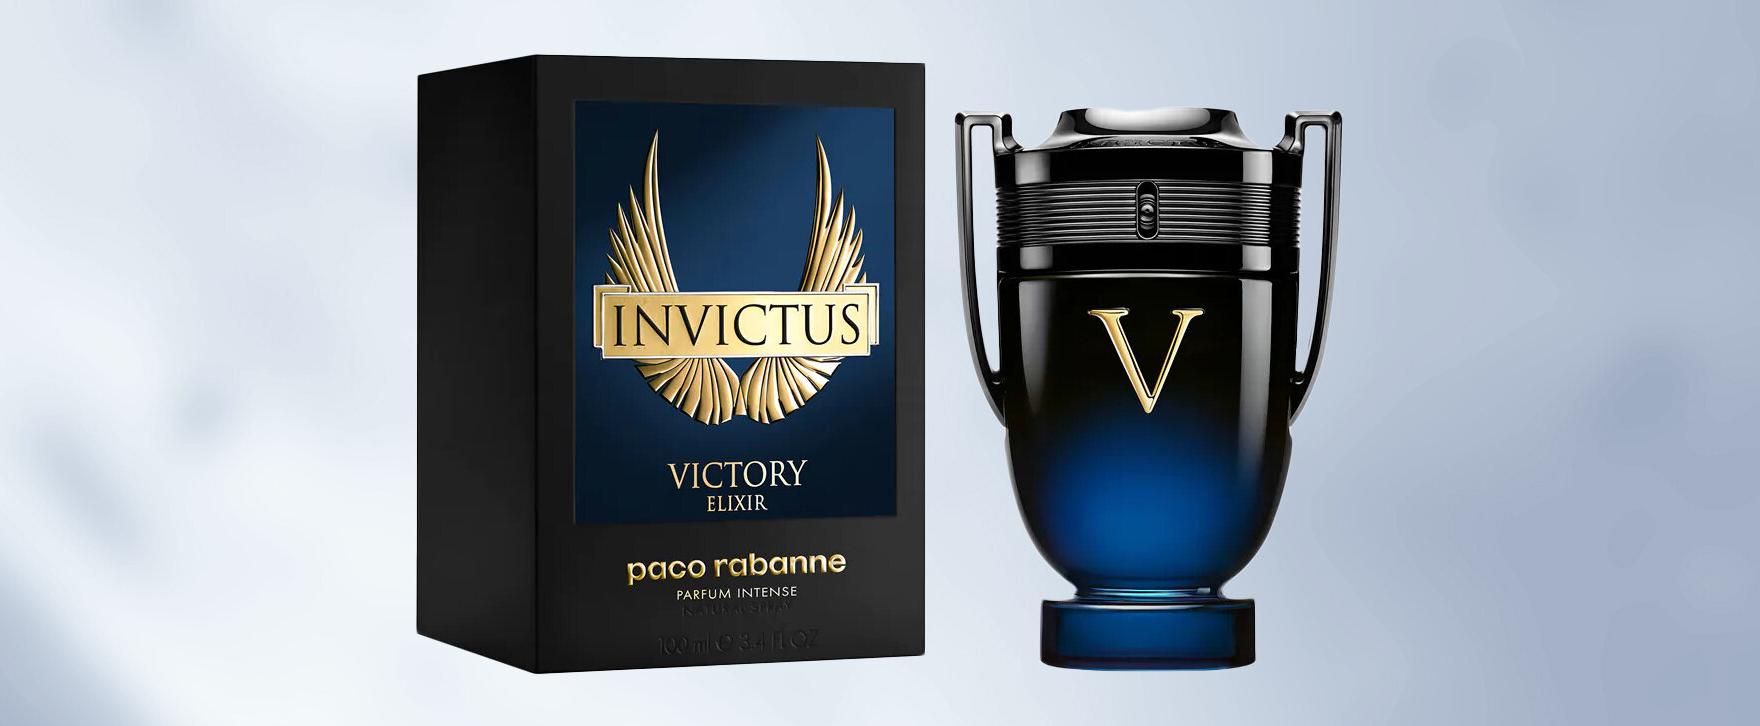 “Invictus Victory Elixir” - New Fresh Spicy Fragrance for Men by Paco Rabanne